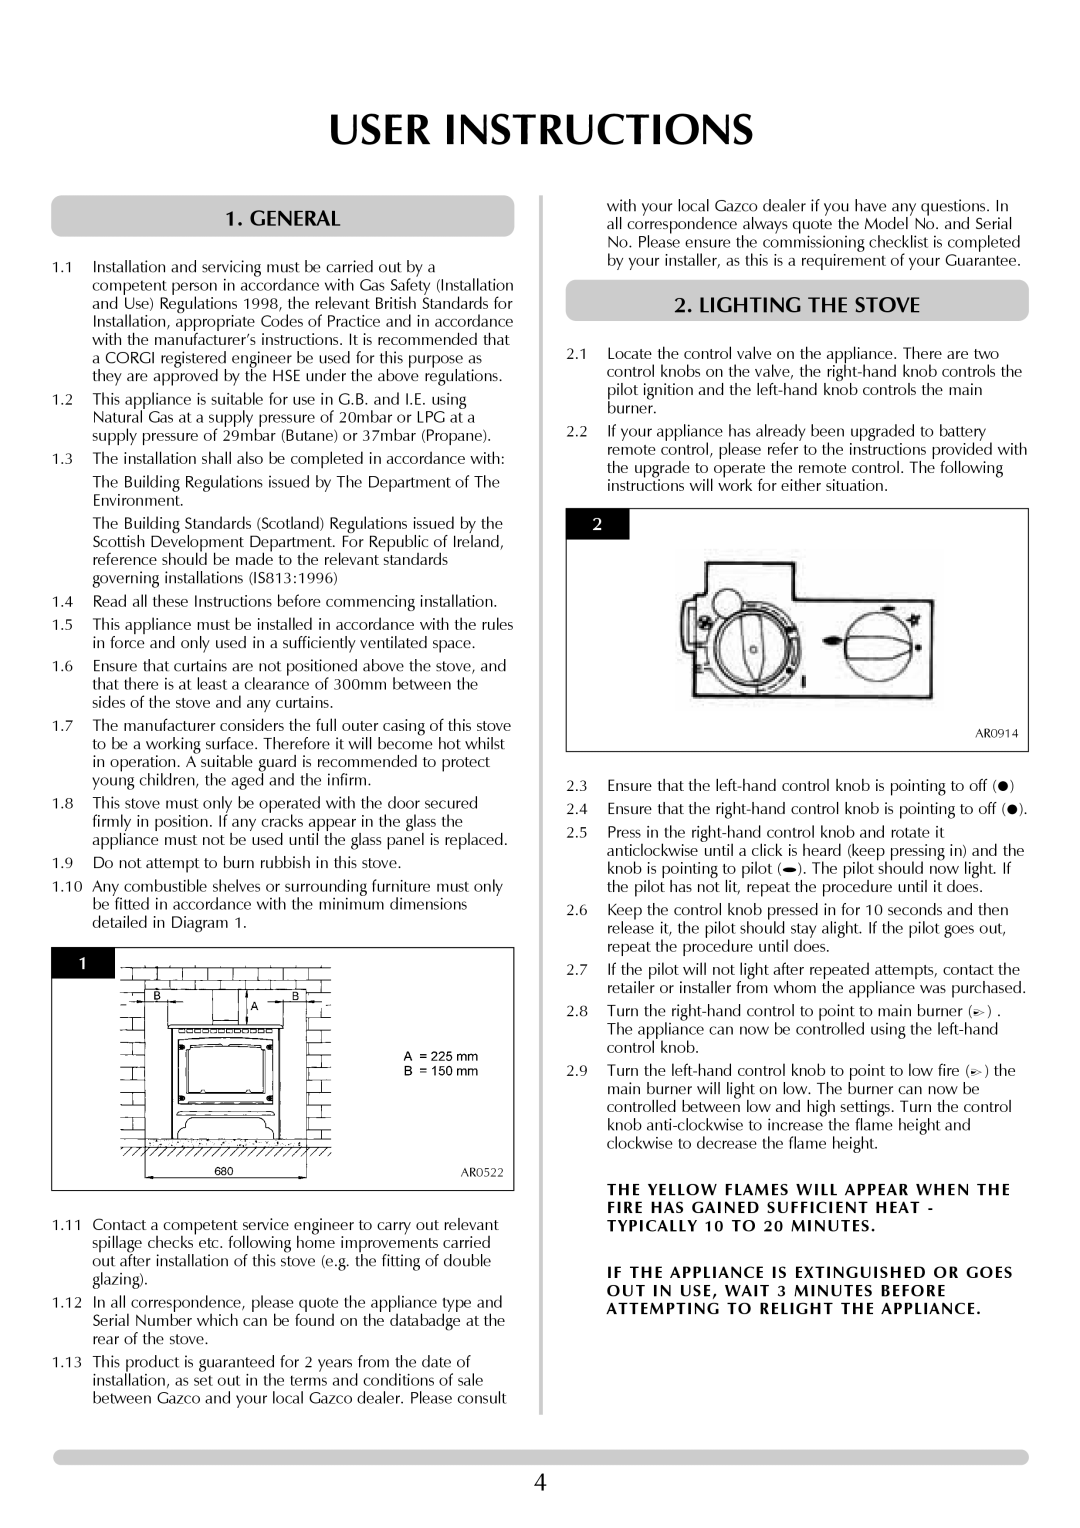 Stovax Stove Range manual User Instructions, General, Lighting The Stove 